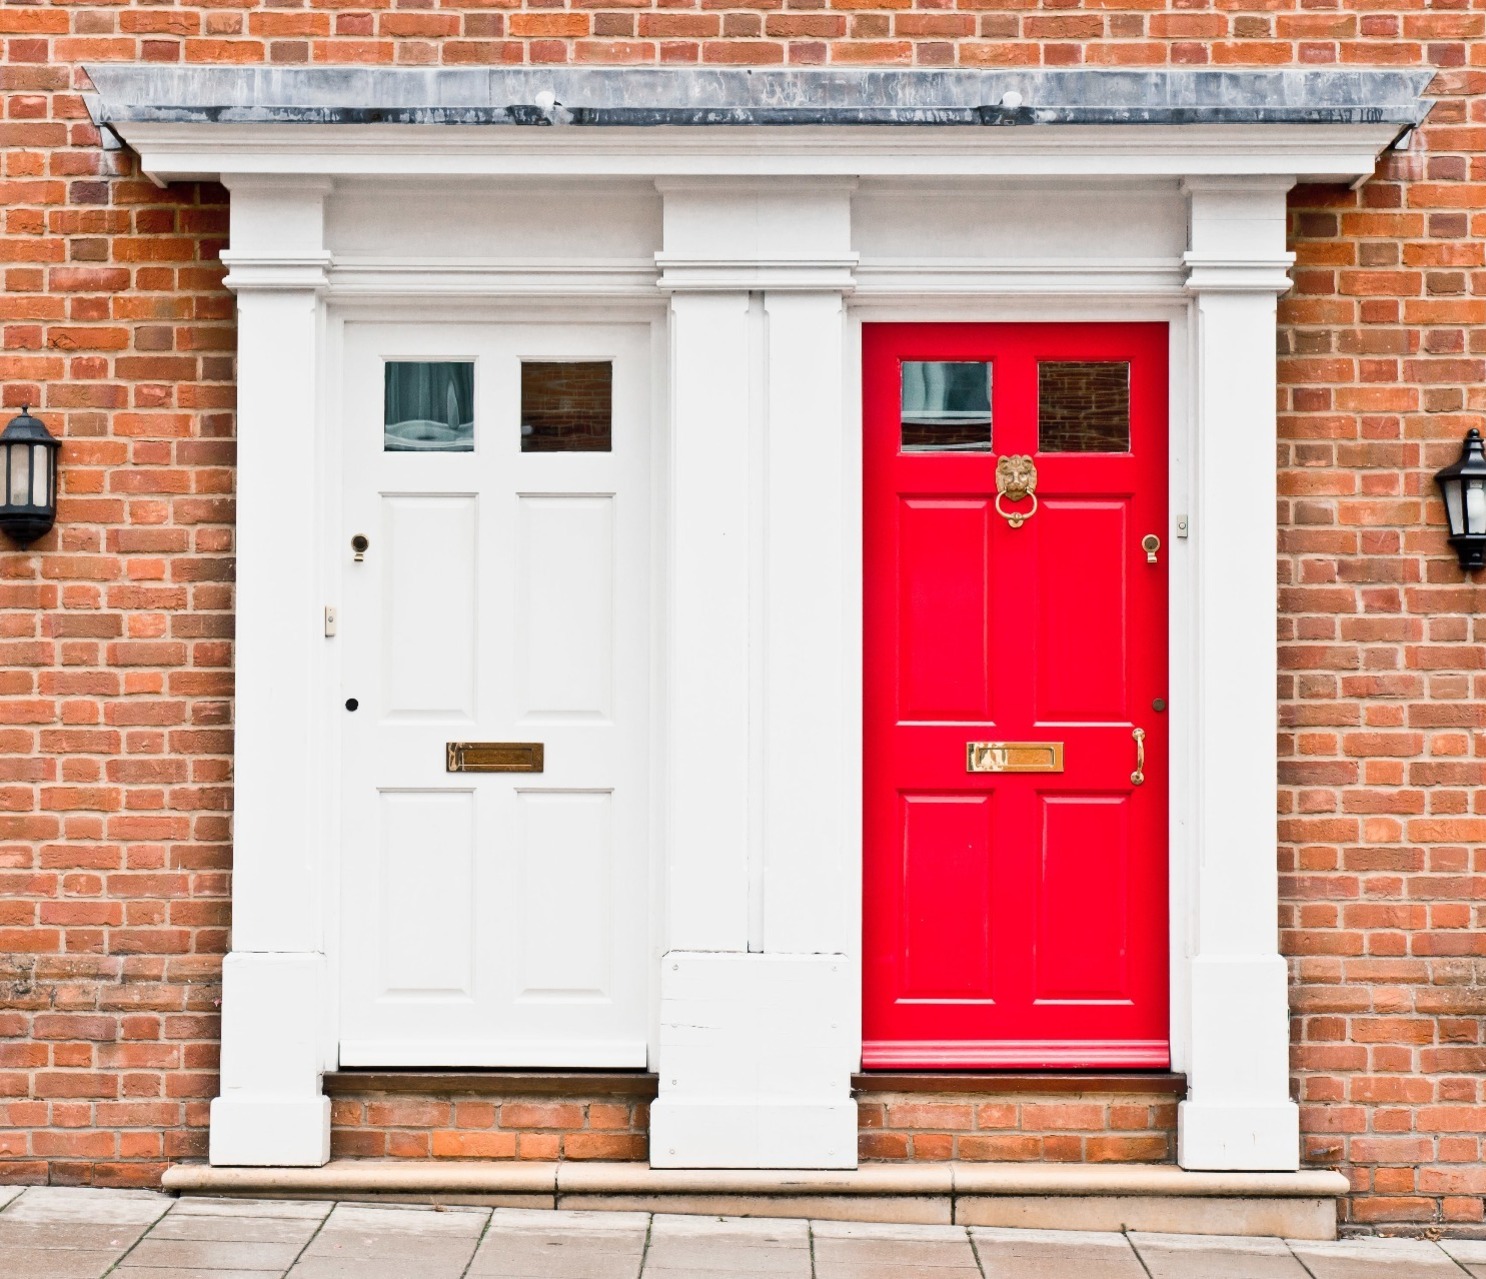 A terraced house, with a red door, and a terraced house, with a white door.  Our Conveyancing Solicitors can assist with Transfers of equity.  Follow this link to find out more.